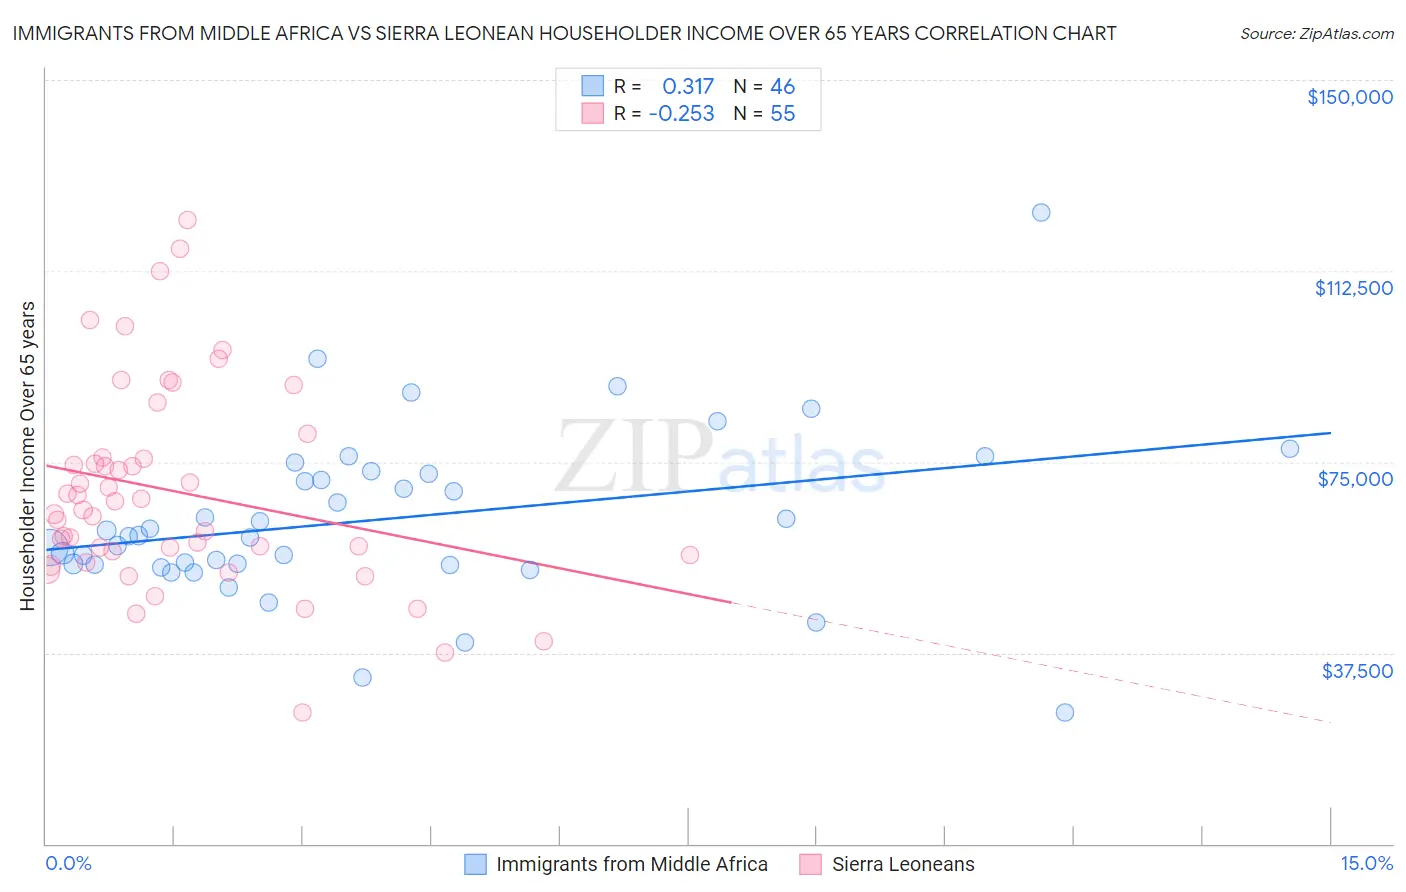 Immigrants from Middle Africa vs Sierra Leonean Householder Income Over 65 years